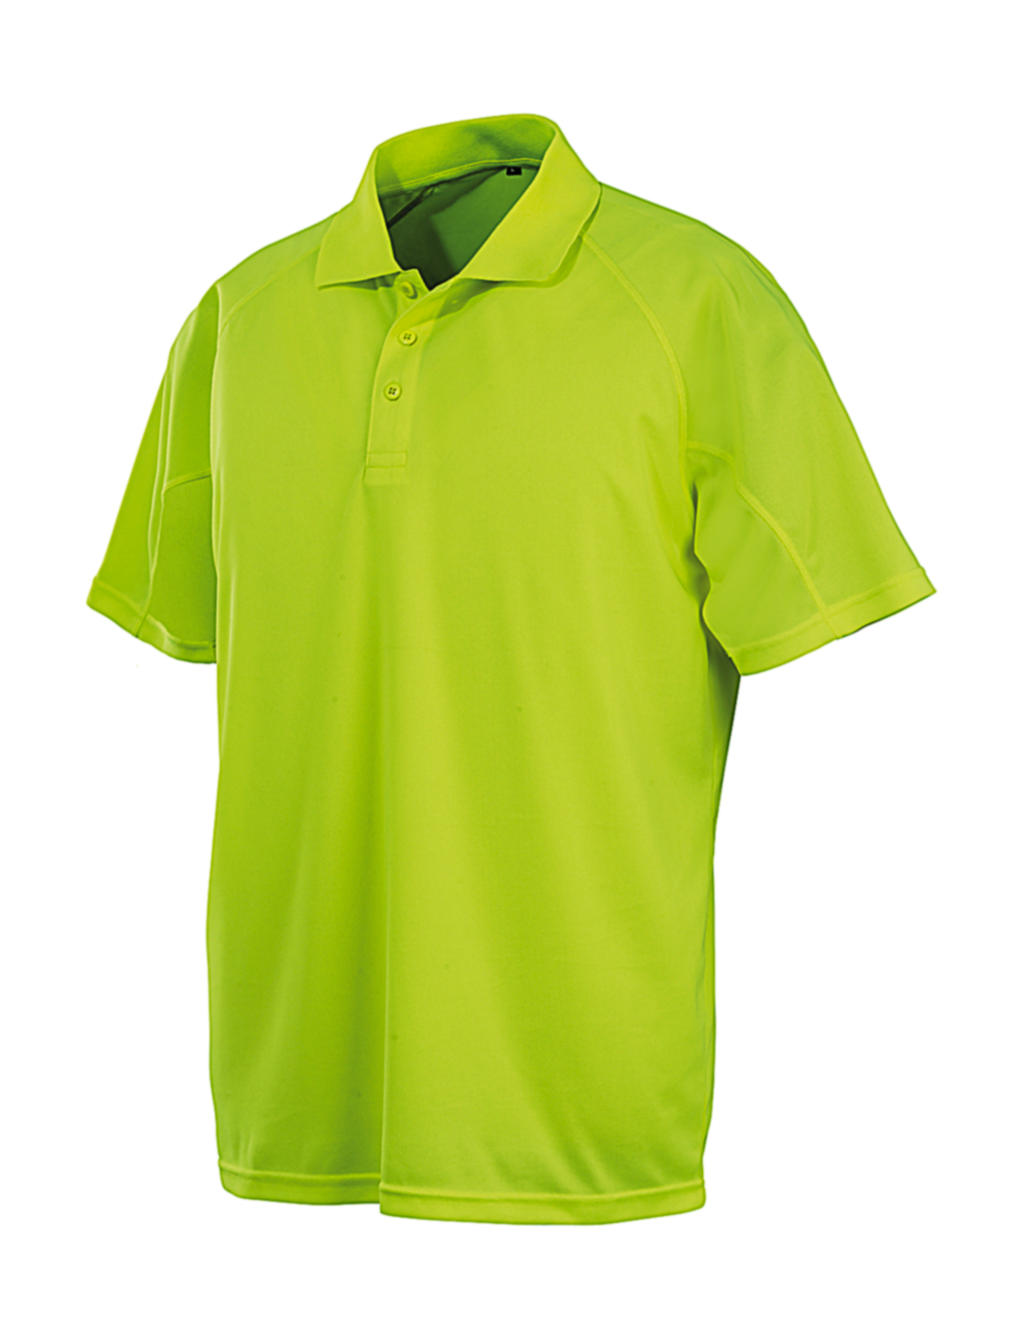  Performance Aircool Polo in Farbe Flo Yellow